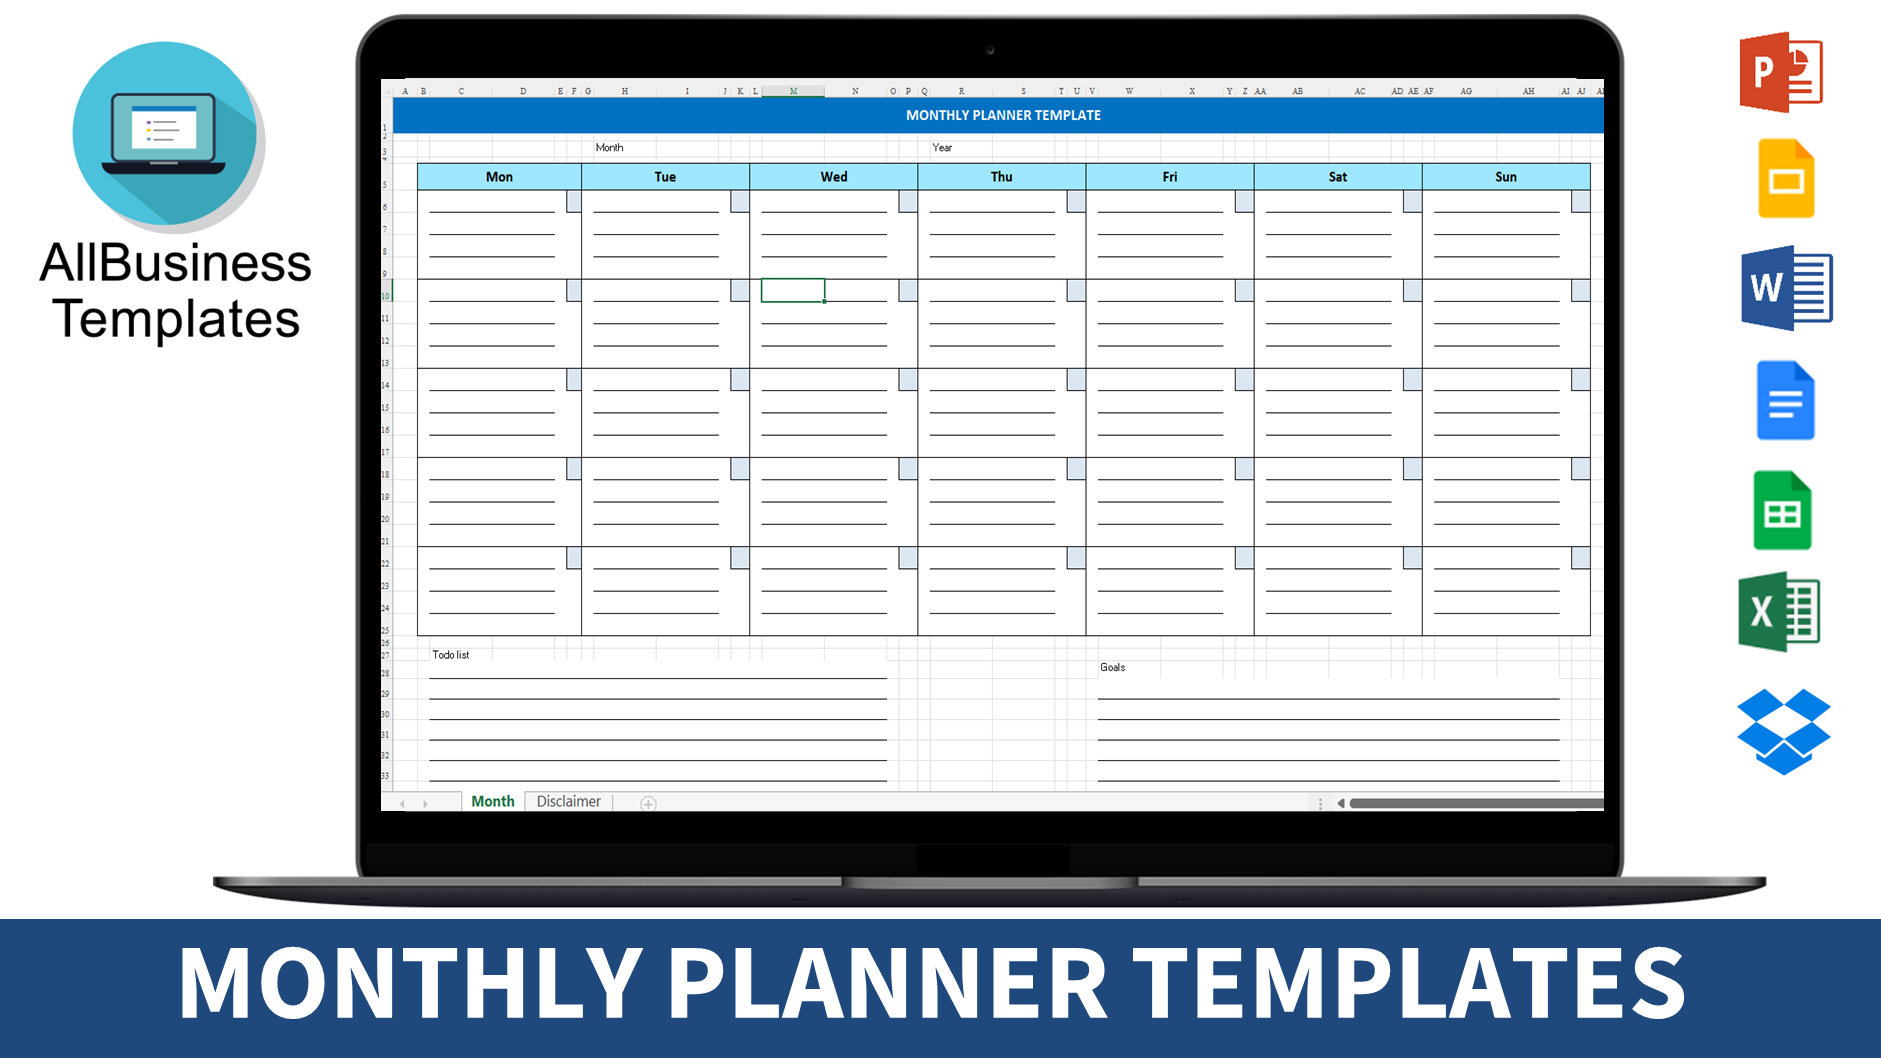 Monthly Planner Template main image